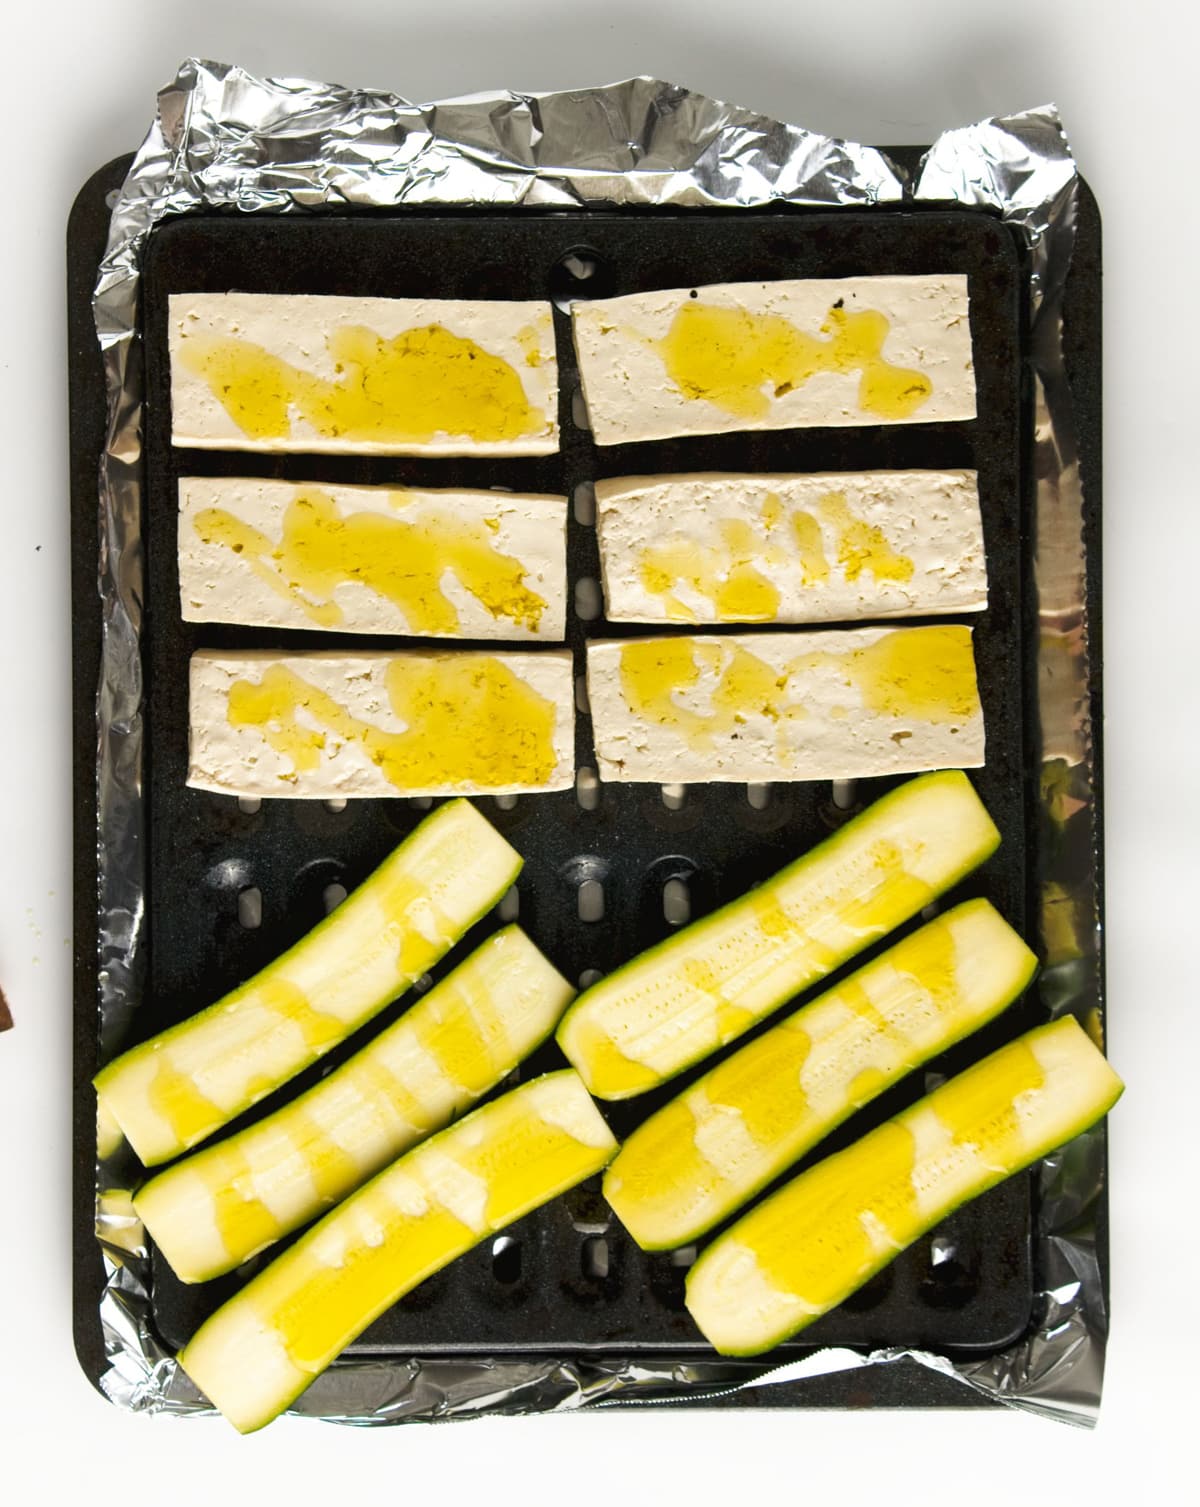 Tofu and zucchini strips brushed with oil on a black baking sheet lined with aluminum foil.